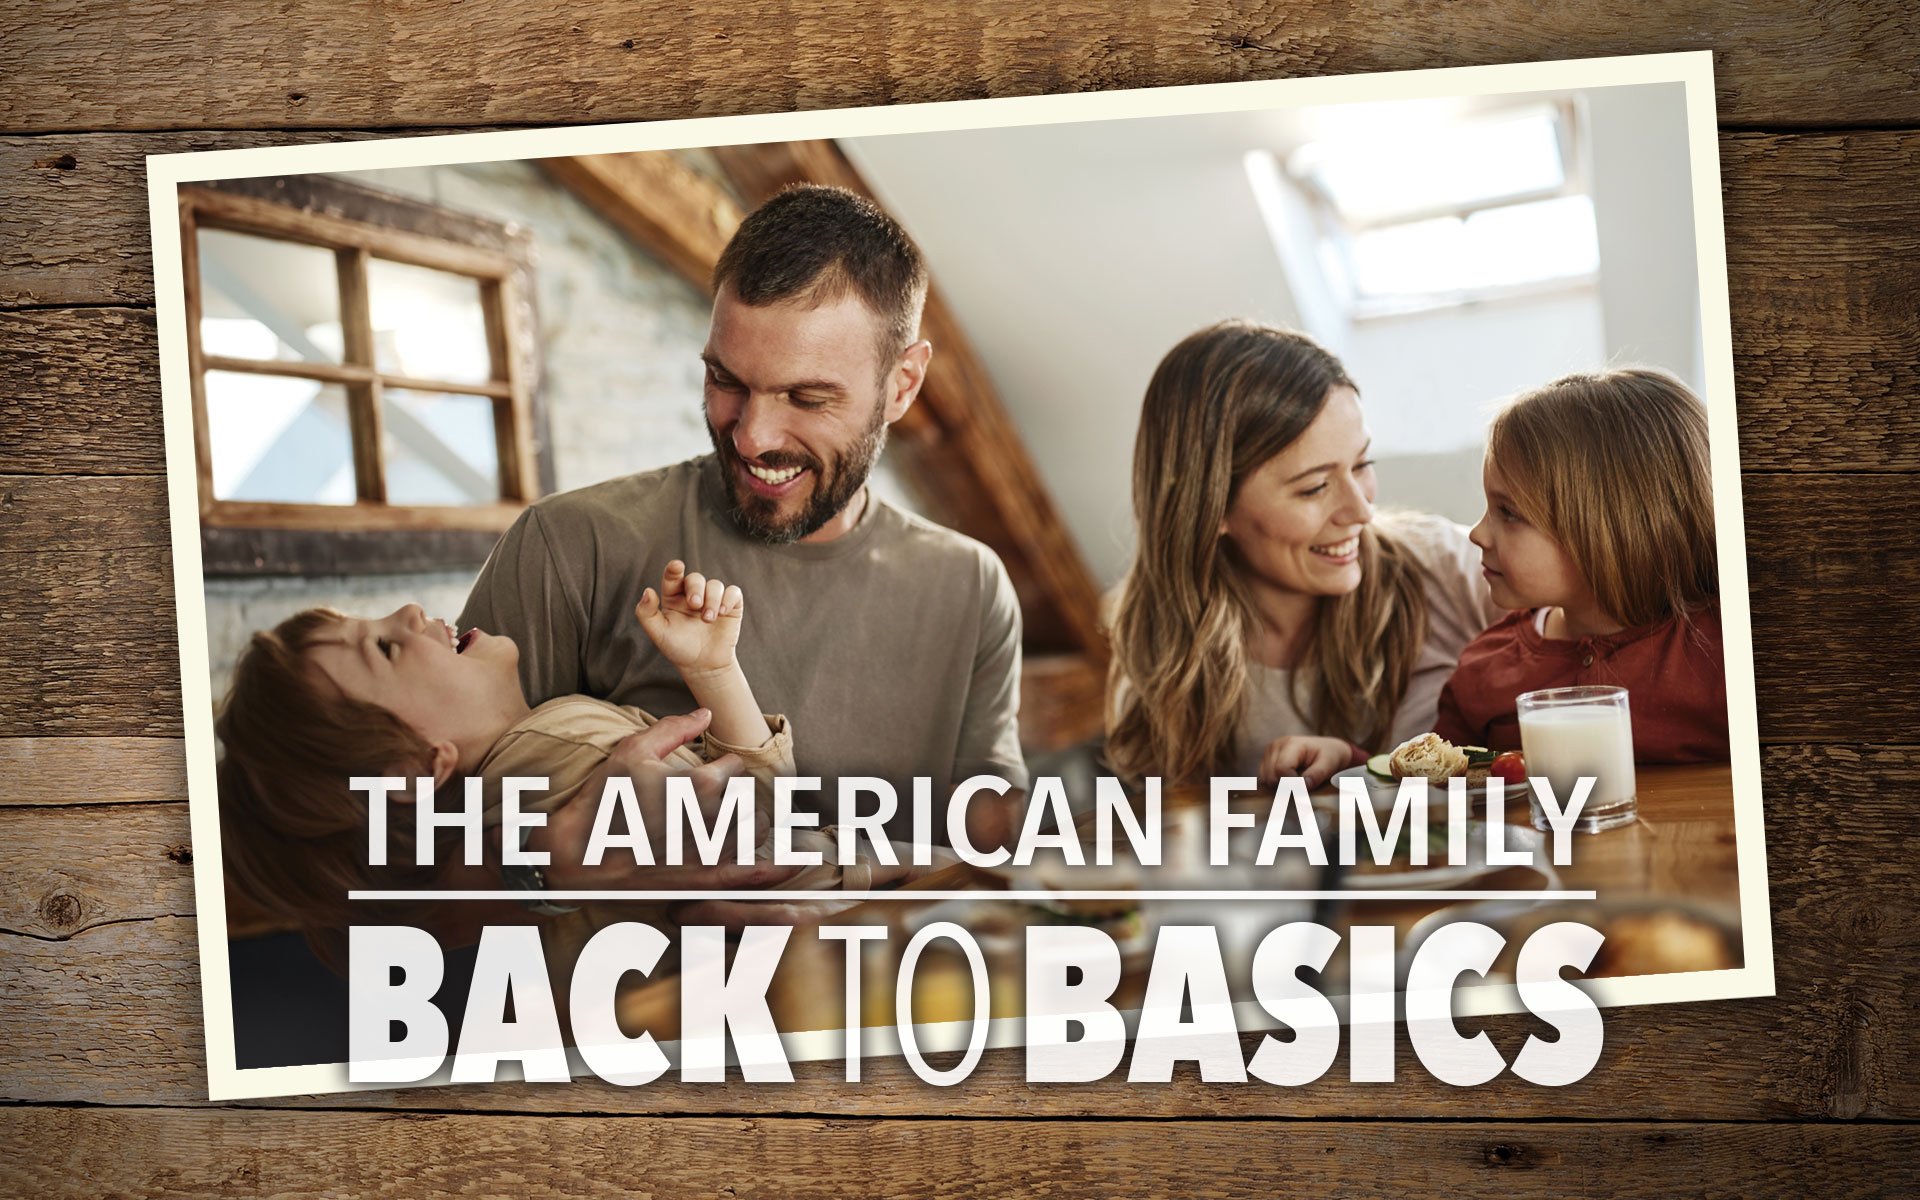 The American Family: Back to Basics